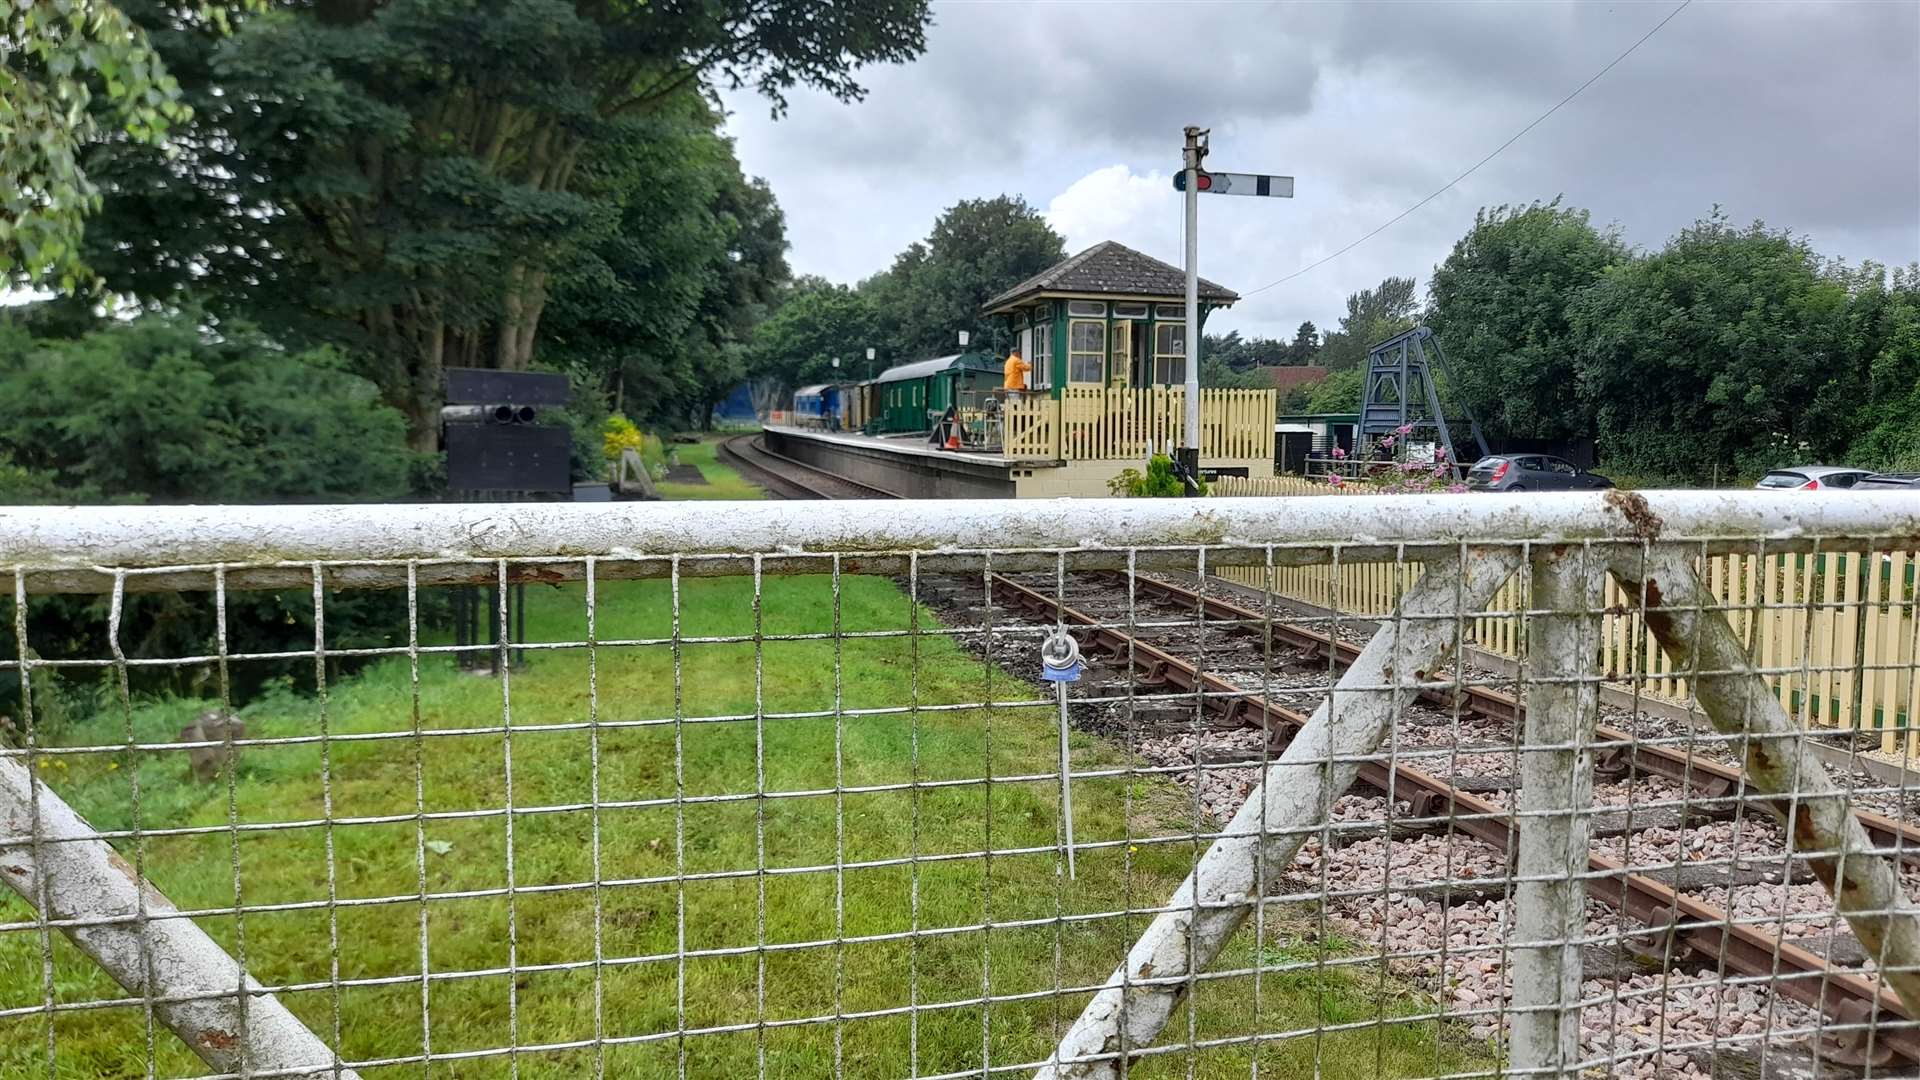 One of the main concerns of the previous application was its impact on the East Kent Light Railway which adjoins the proposed site